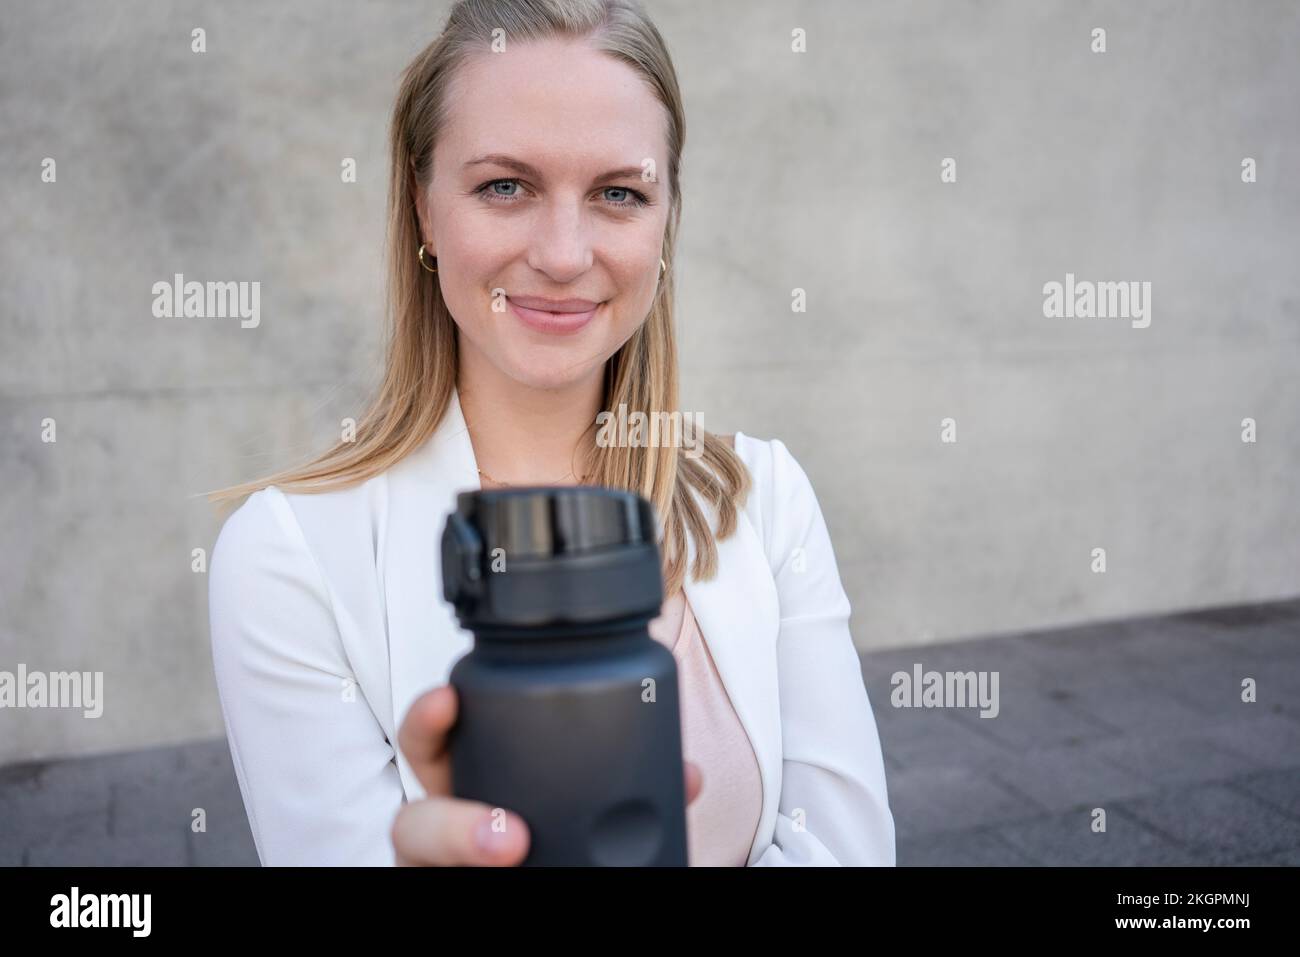 Blond smiling woman showing water bottle Stock Photo